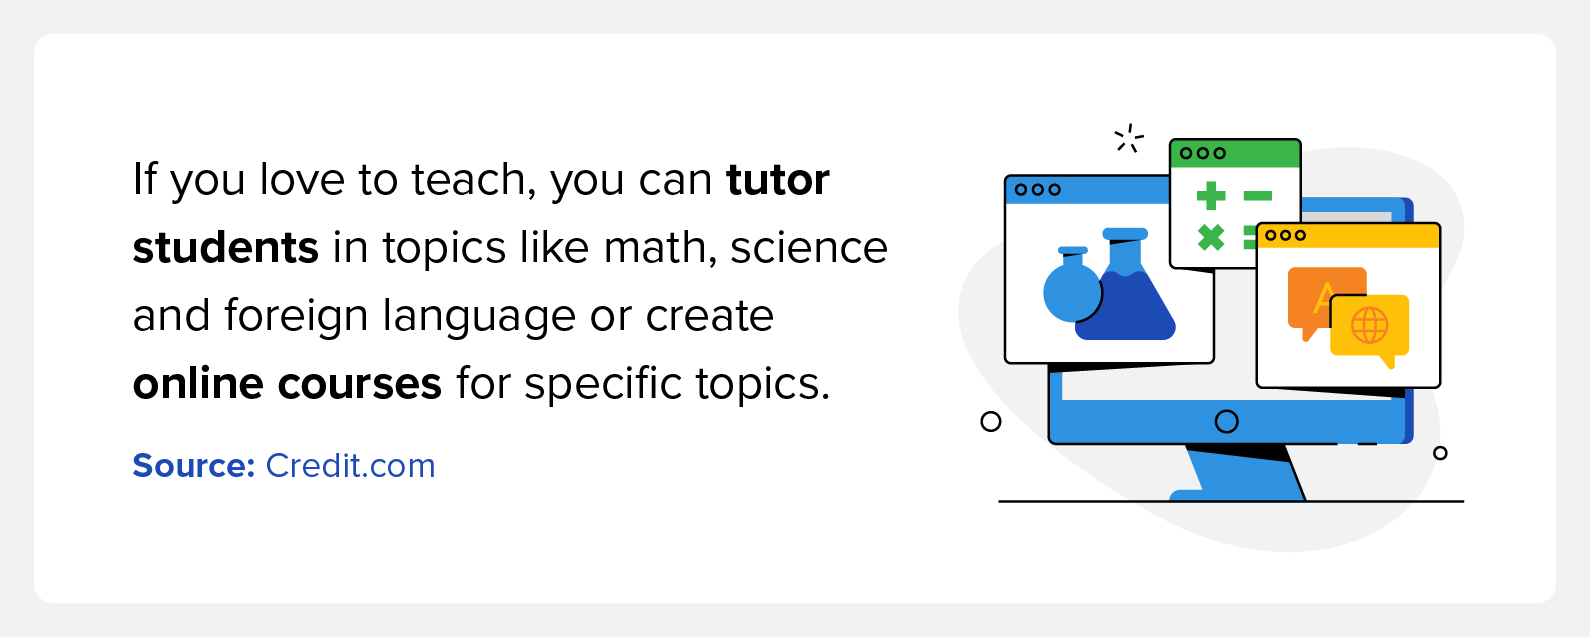 You can make money online as a tutor teaching science, math, foreign languages, and other common subjects.